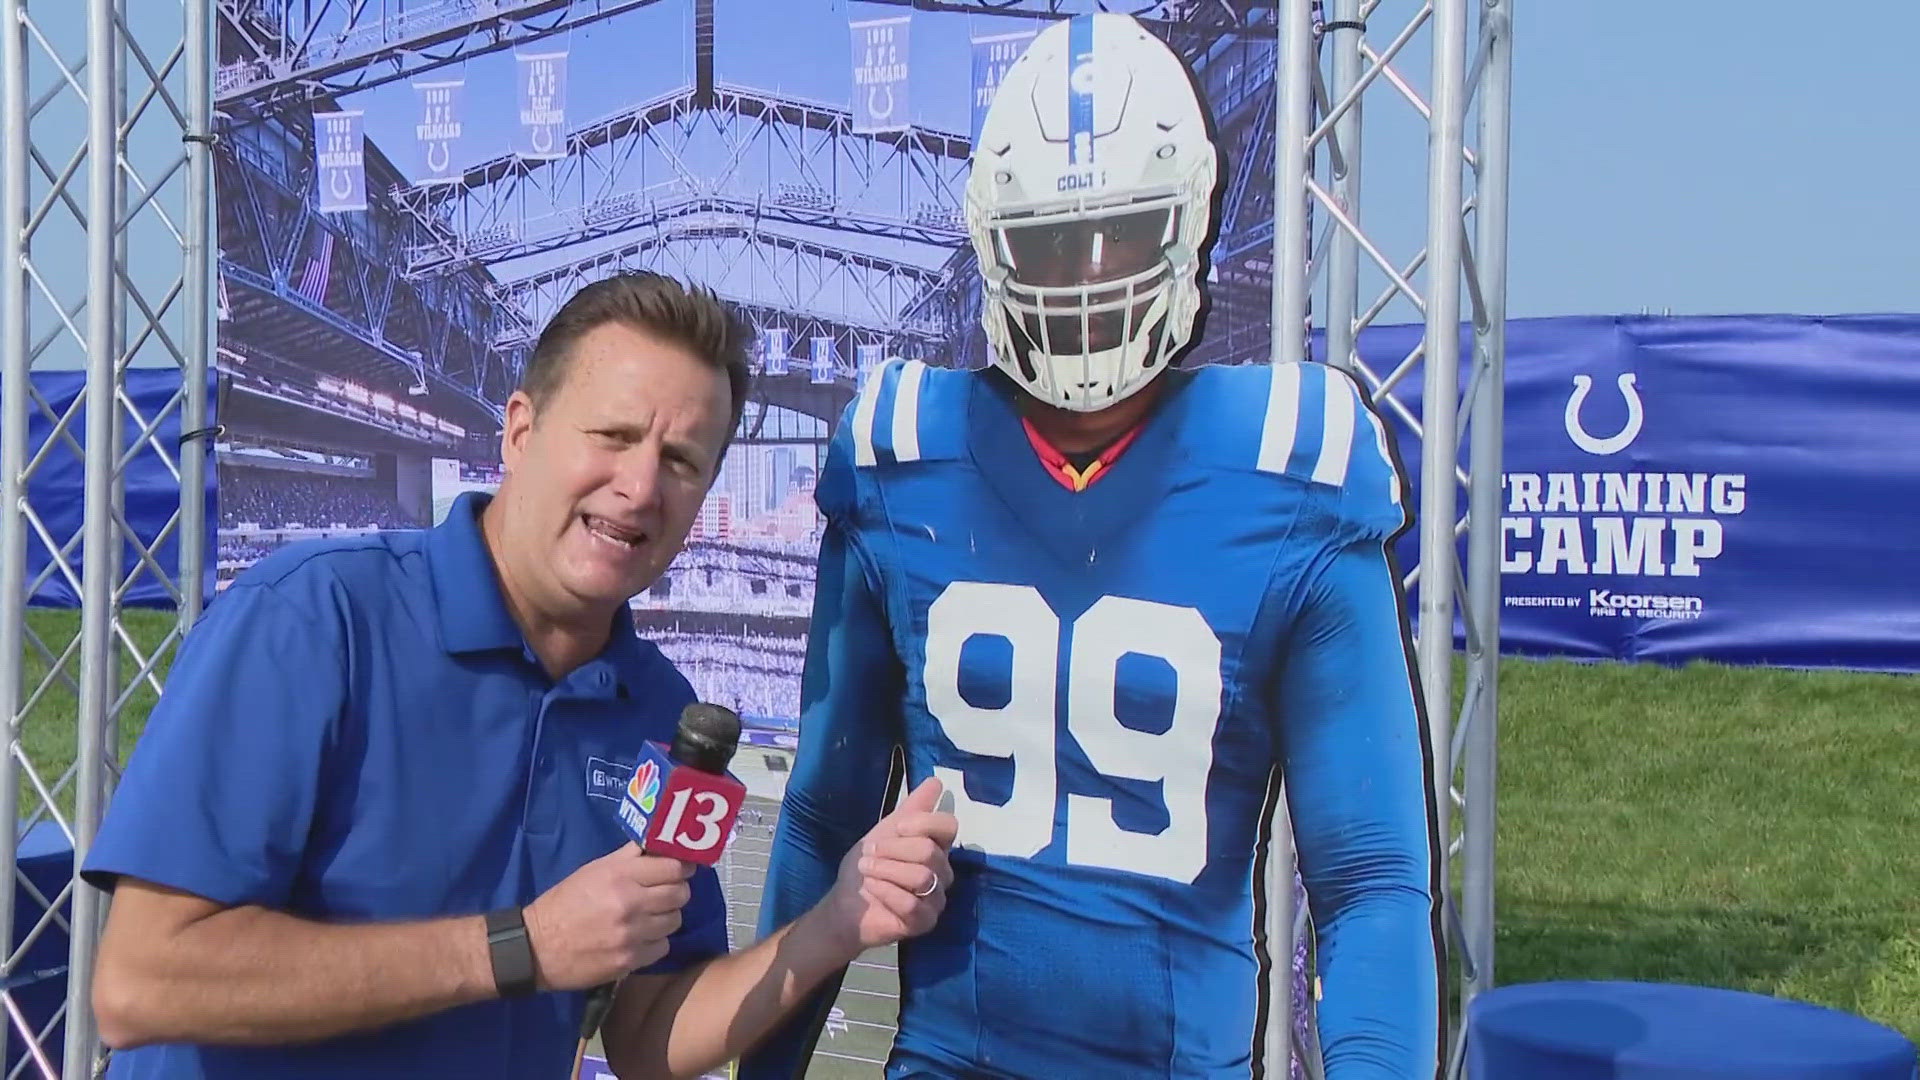 13Sports director Dave Calabro visits Grand Park in Westfield during Indianapolis Colts training camp during his weekly quest to find some Good News!